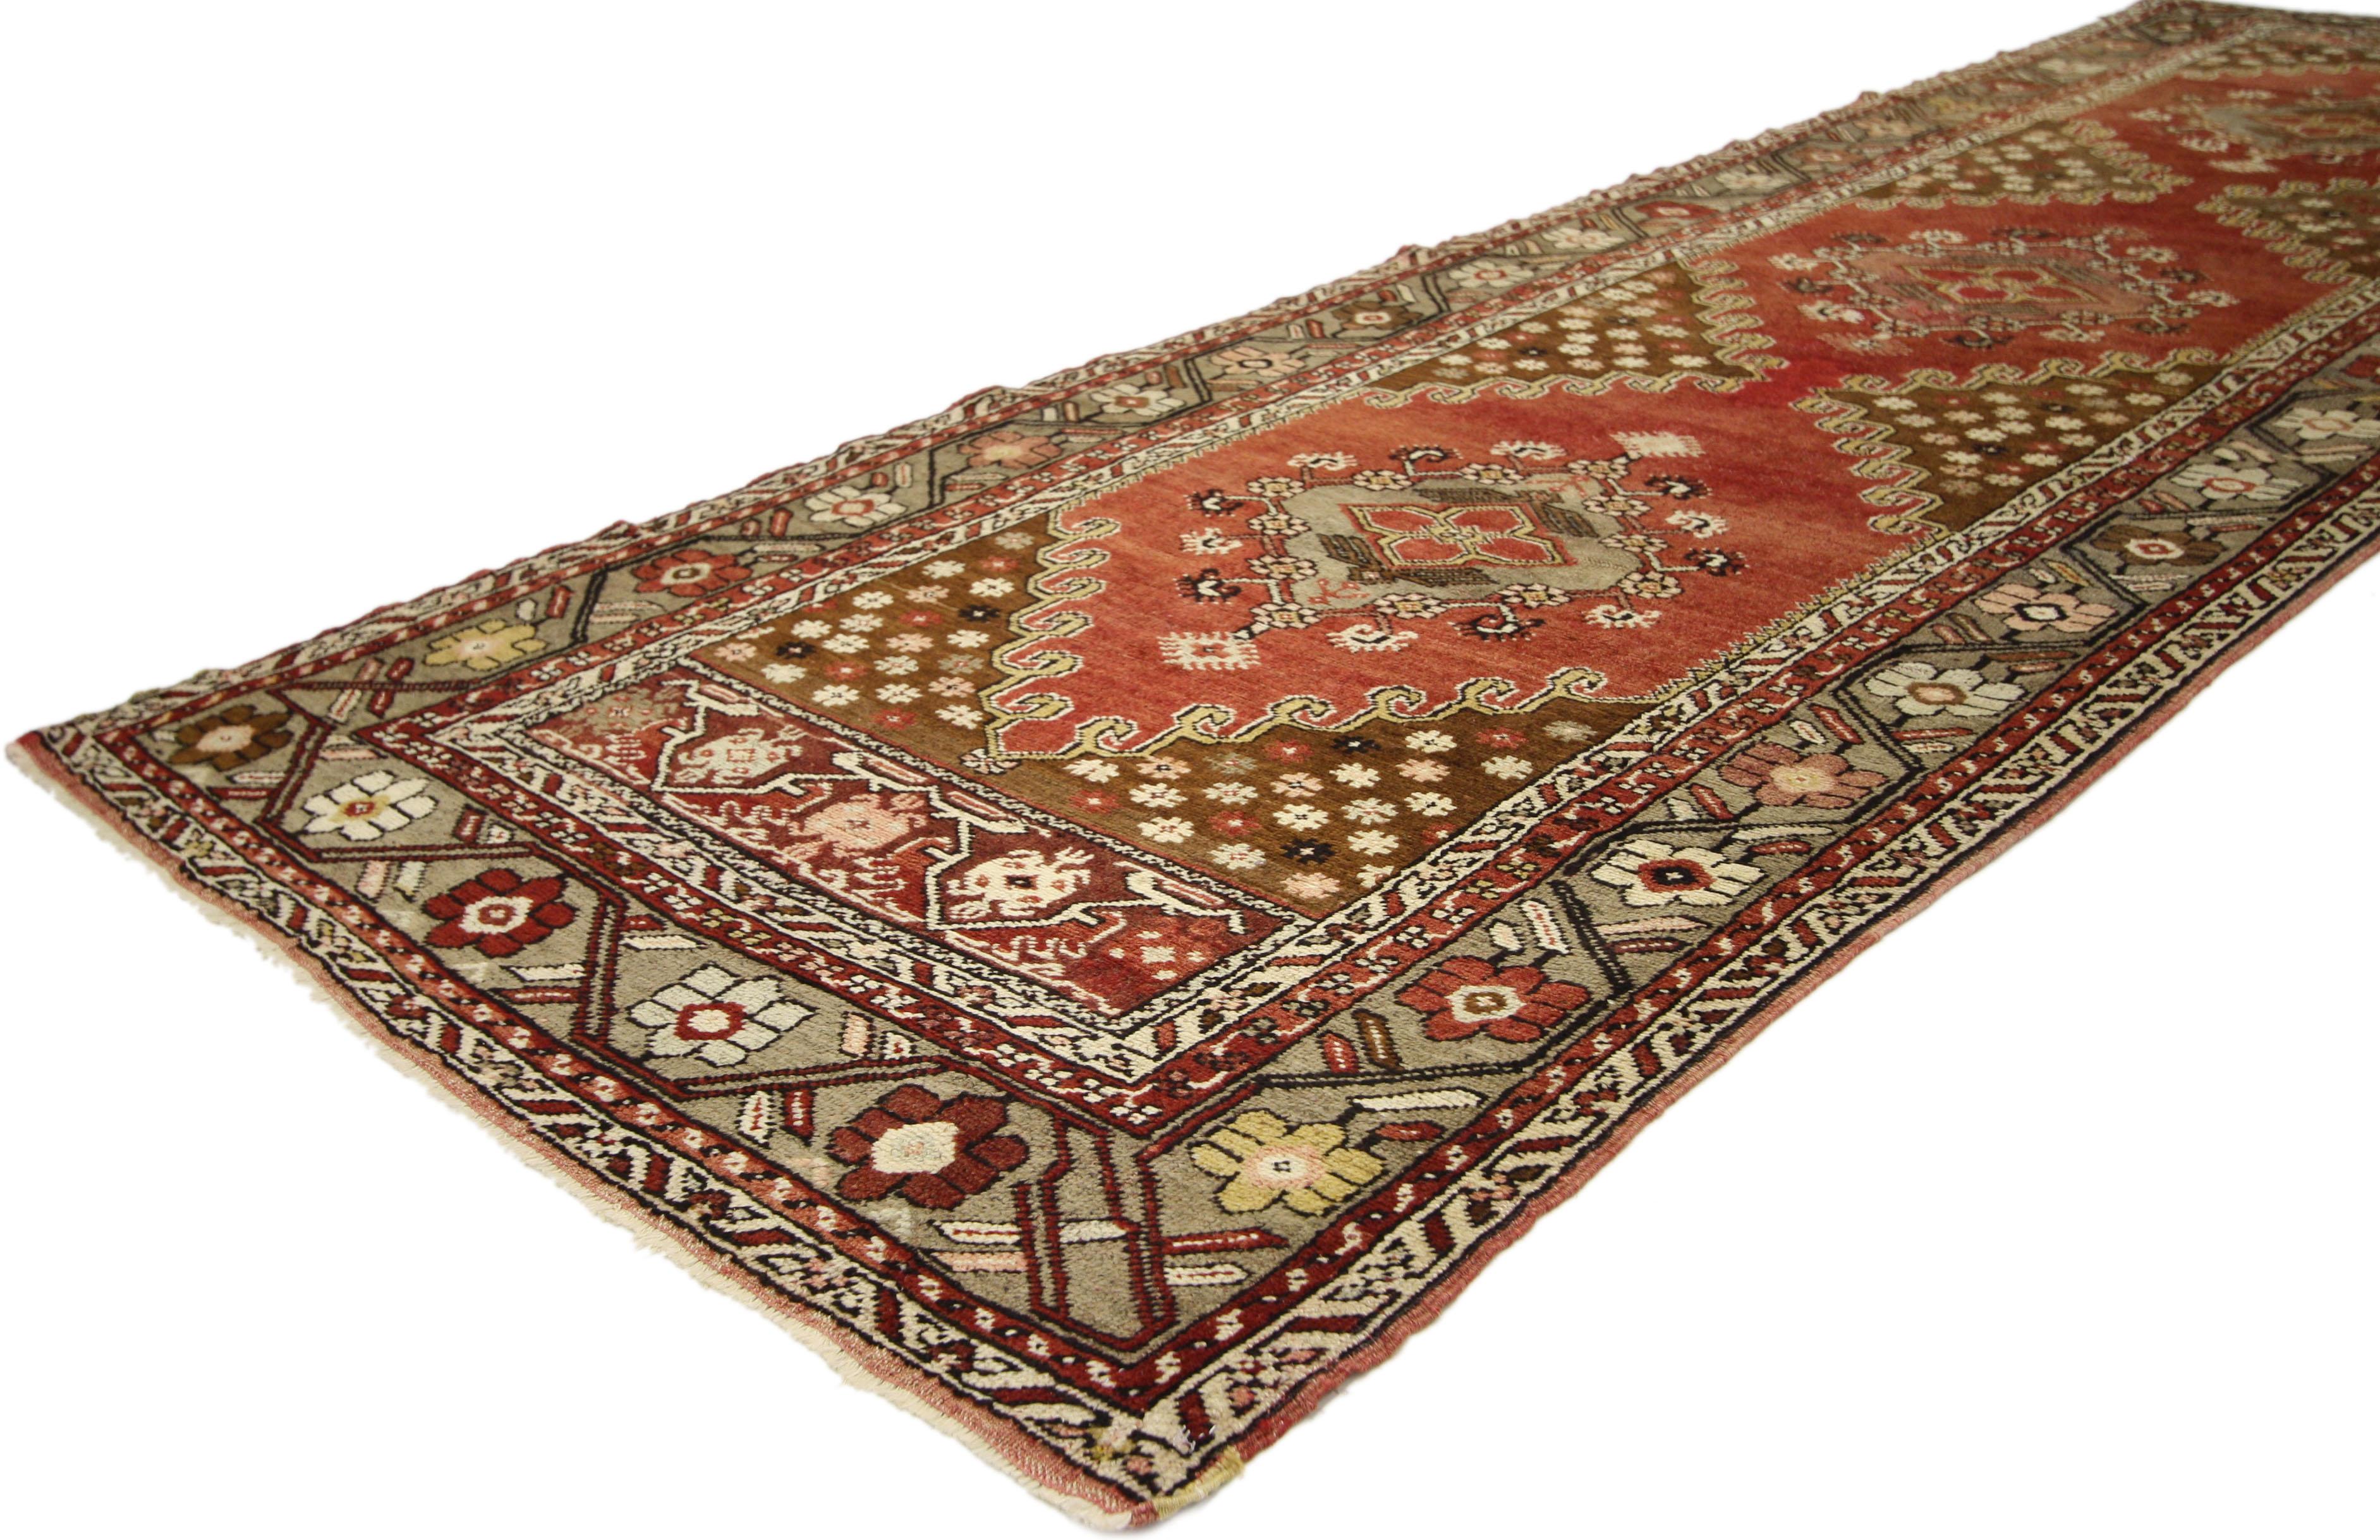 73839 Vintage Turkish Oushak runner with Tribal style, Hallway runner 03'05 x 10'08. Warm and inviting, this hand-knotted wool vintage Turkish Oushak runner beautifully embodies a traditional English Manor style. Running the length of the Oushak